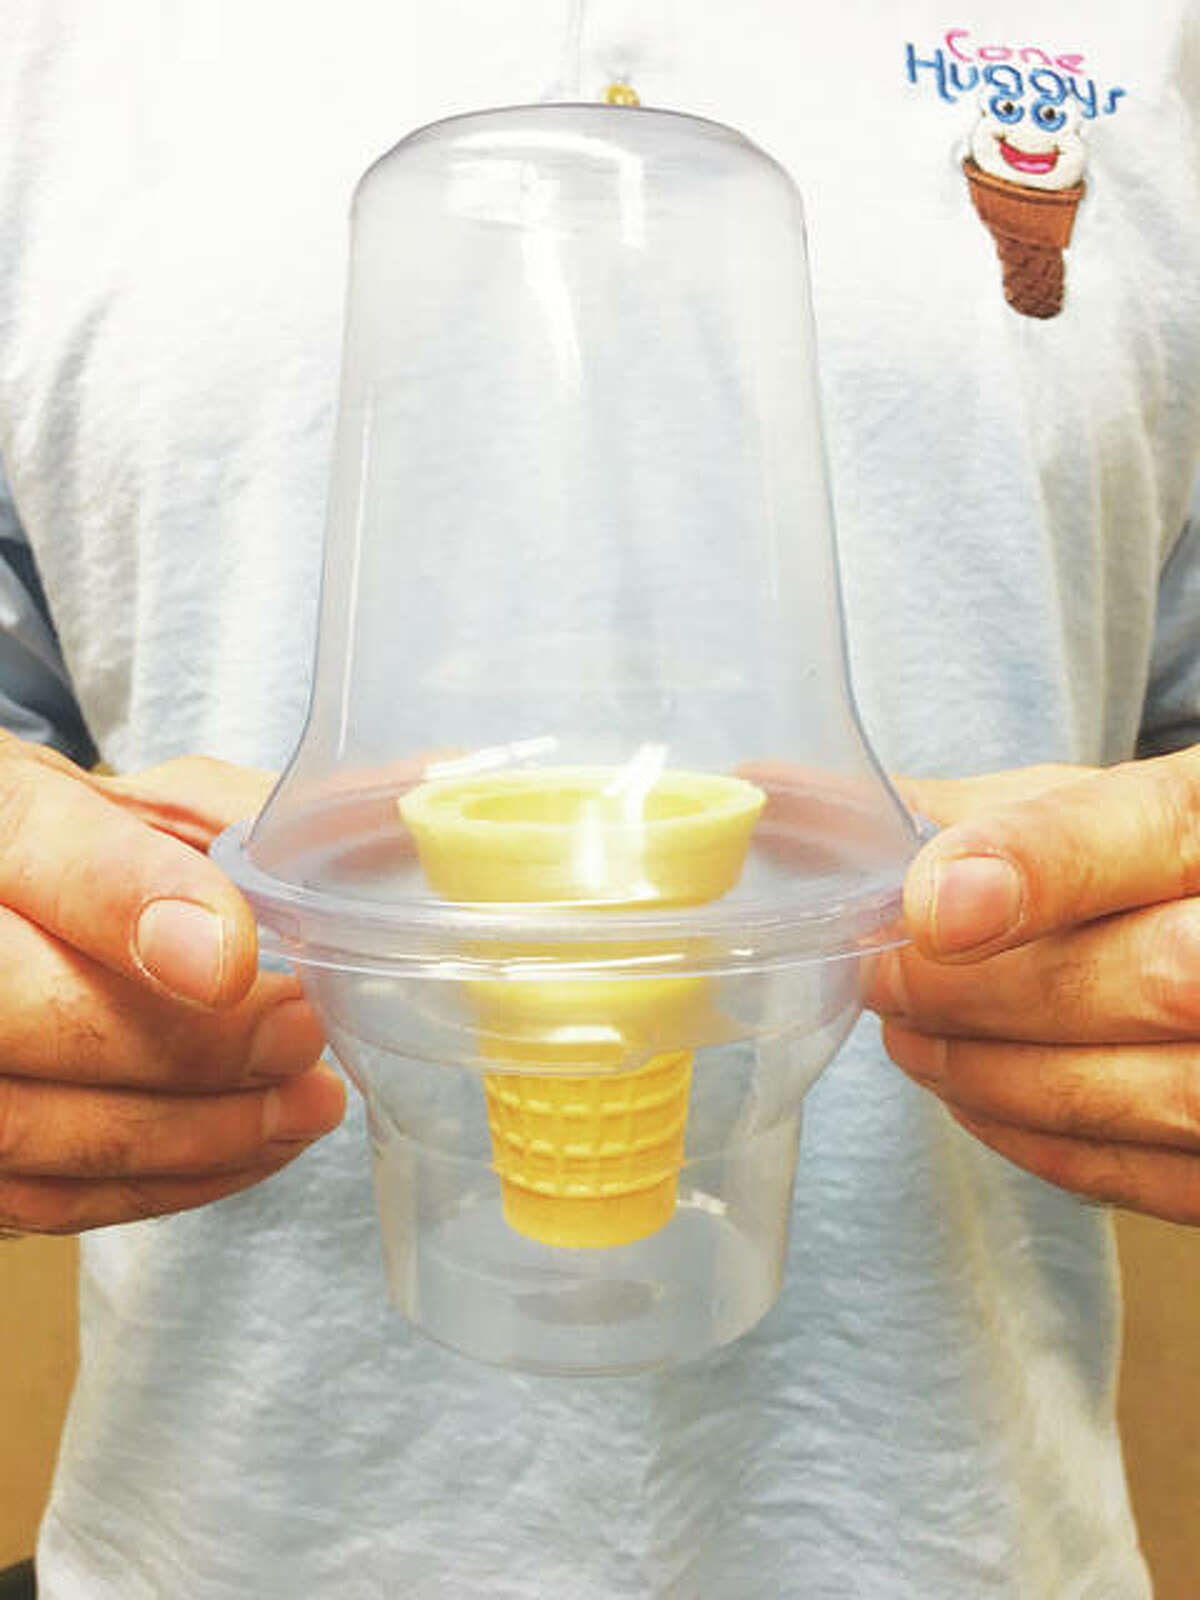 Cone Huggys’ three-piece container design — cup, lid and insert — features an elevated lip in the center of the insert (on which the rim of the cone rests once inserted). By sitting on this lip, it allows any melted ice cream to flow away from the cone itself and go down the insert’s drainage holes. This keeps the cone from becoming soft and mushy.